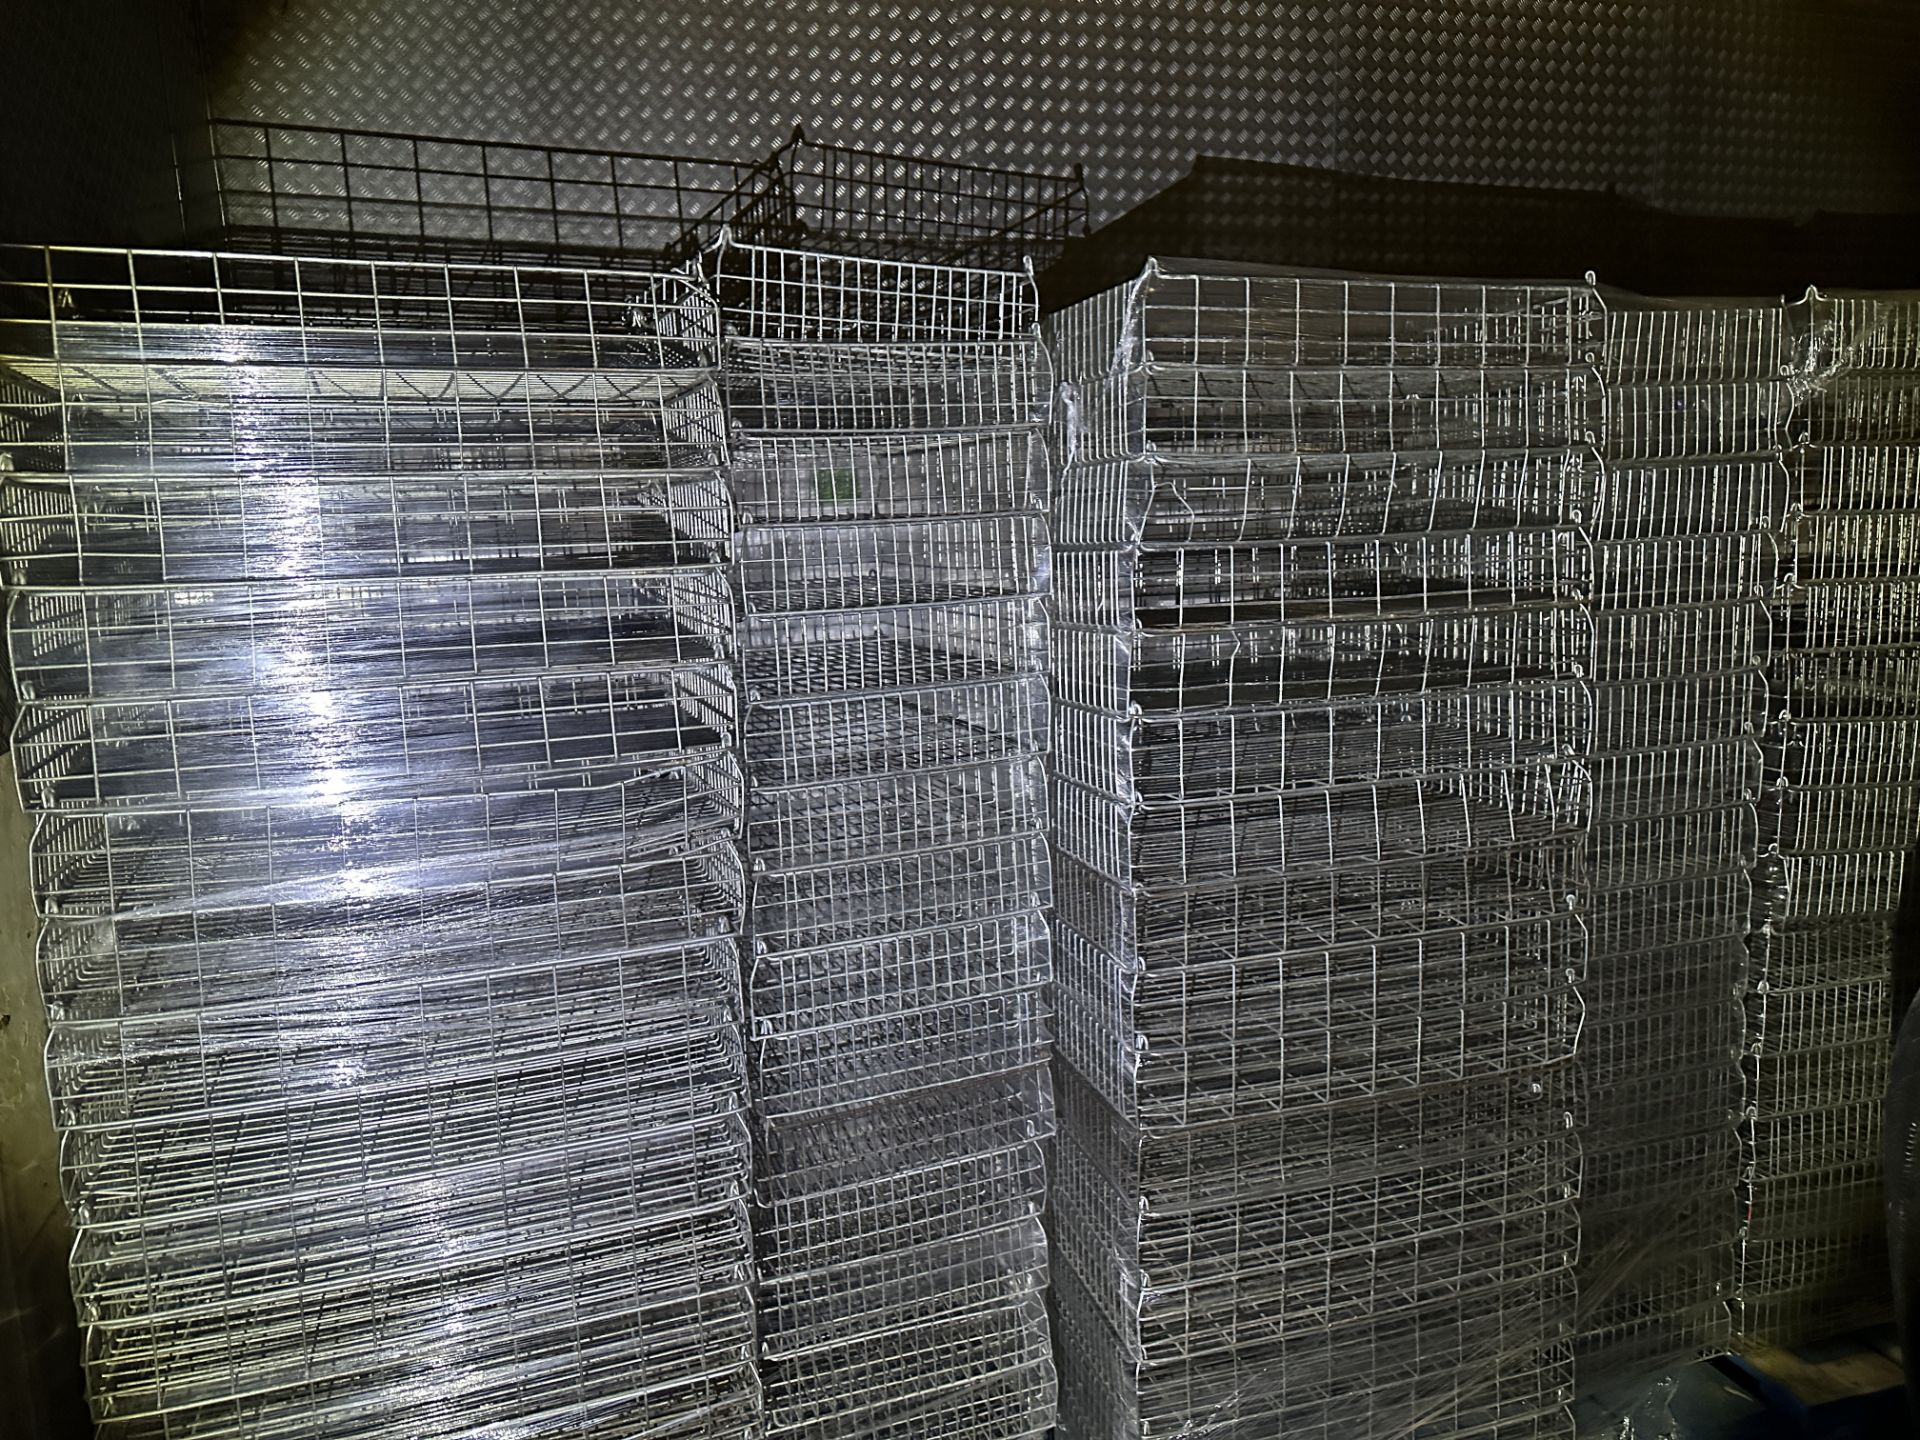 4 X PALLETS CONTAINING A TOTAL OF 180 WIRE TRAYS.